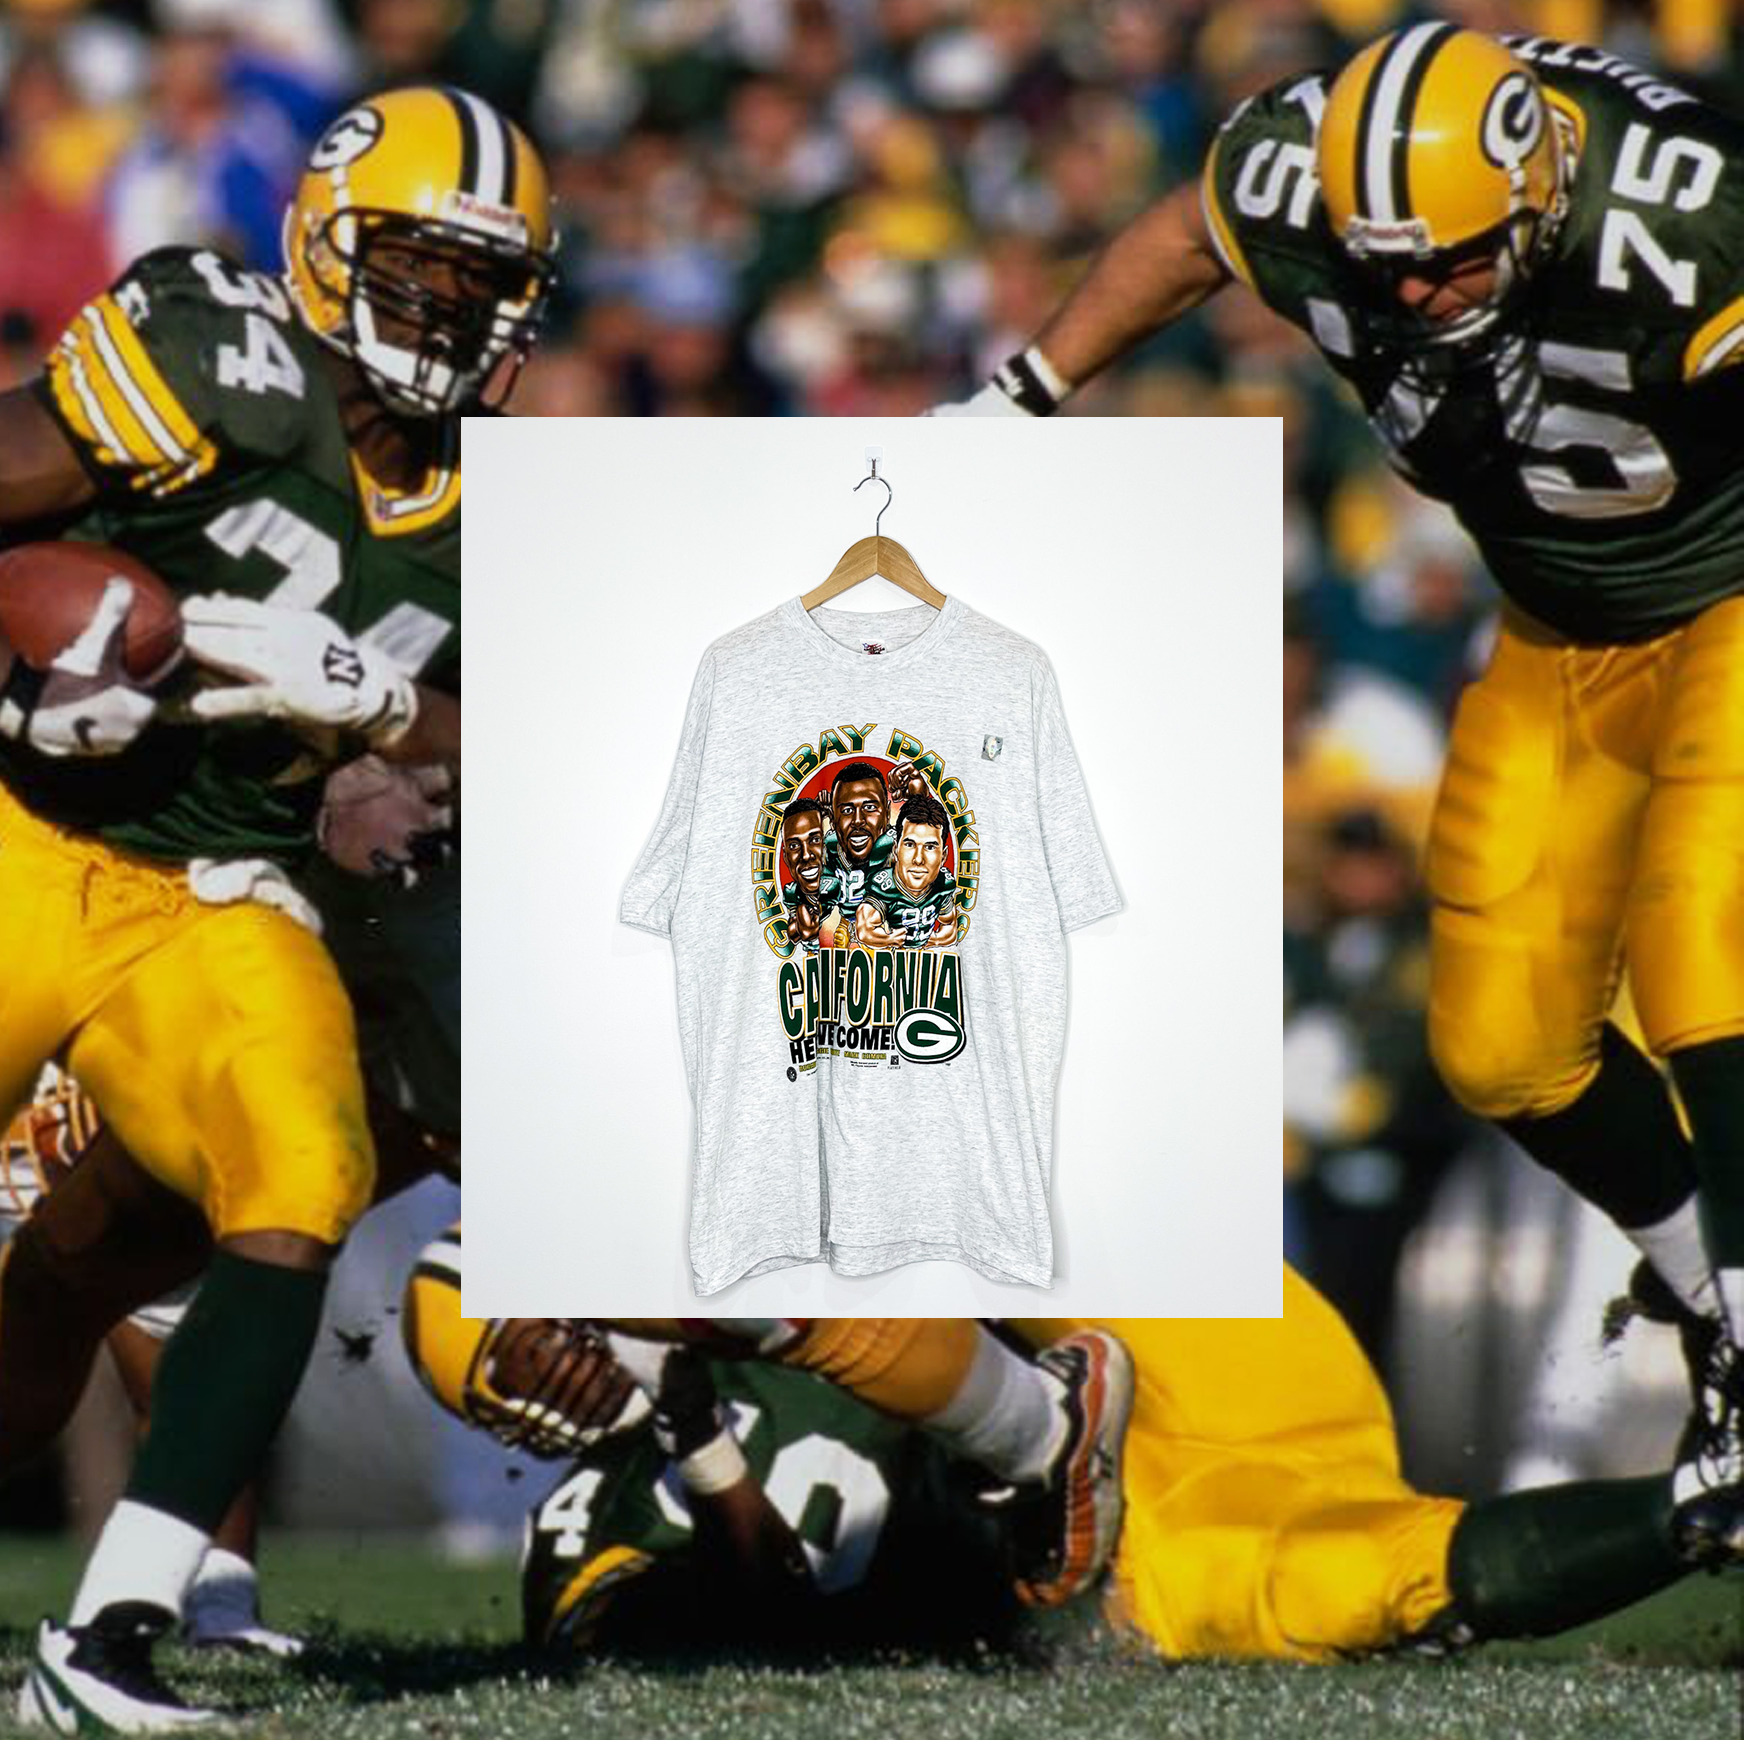 GREEN BAY PACKERS "California Here We Come" CARICATURE TEE (Deadstock)